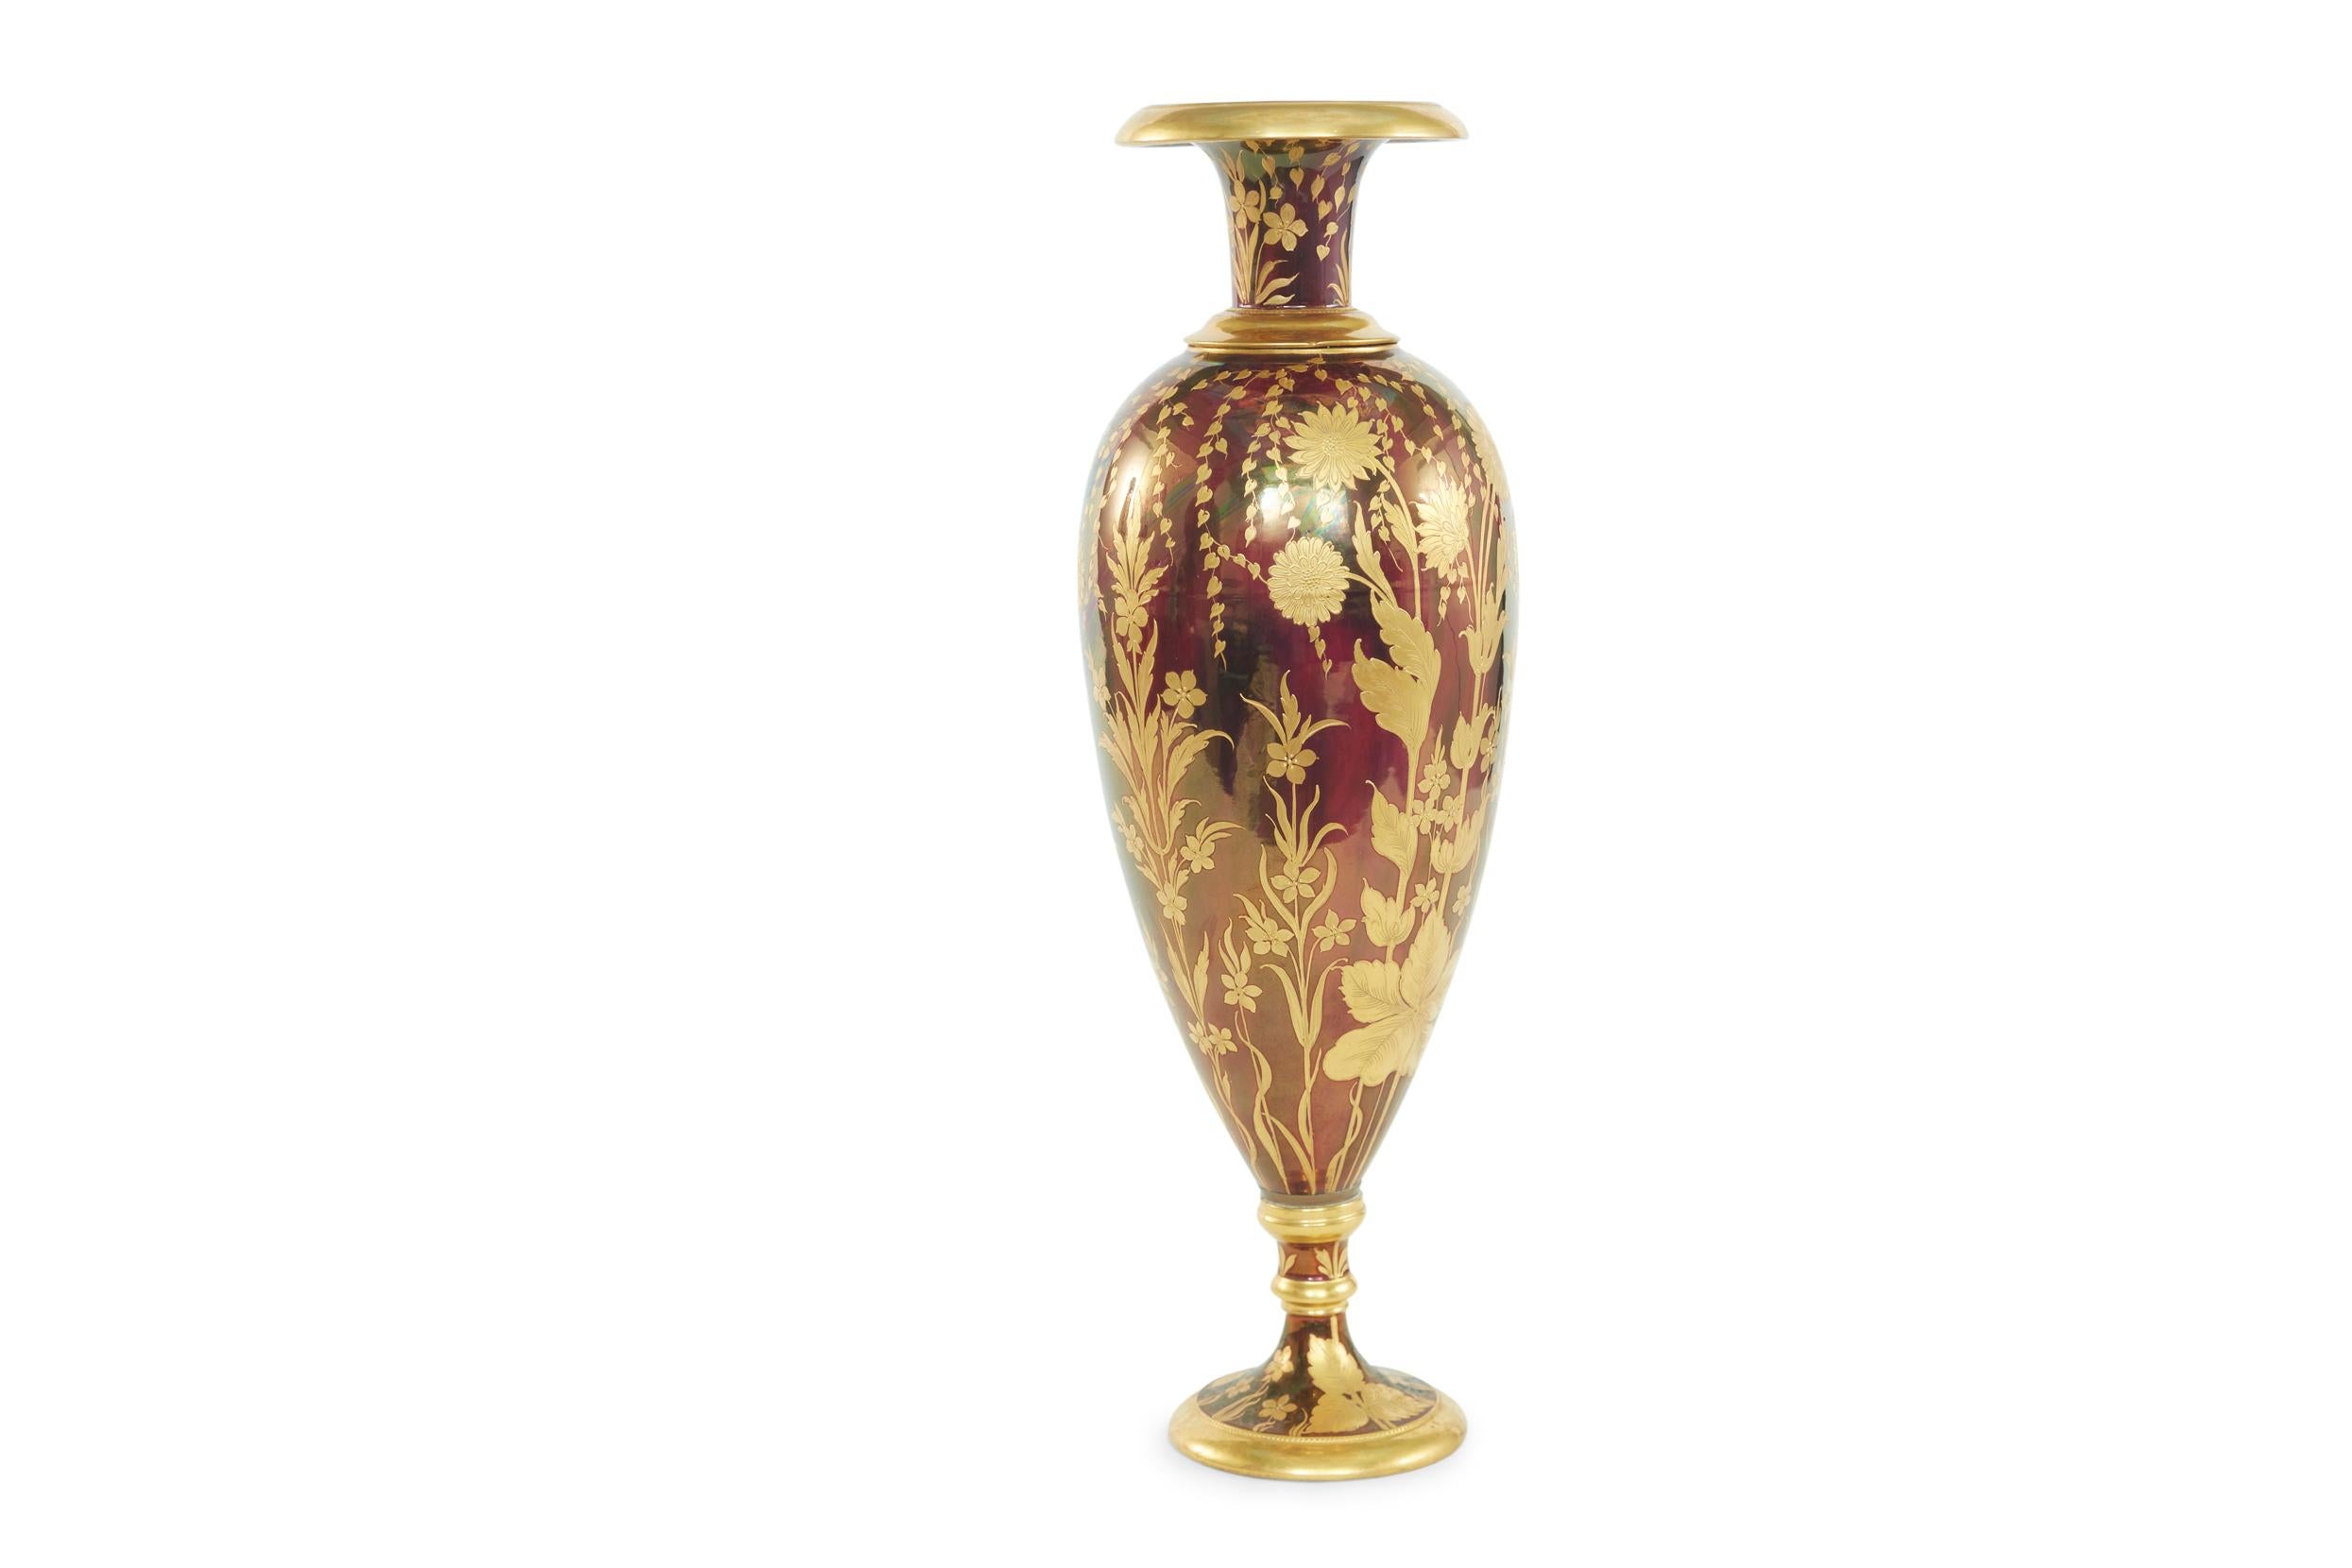 Gilt gold with hand painted details Austrian porcelain decorative vase / piece with exterior scene design. Painted by Ackermann & Fritze 